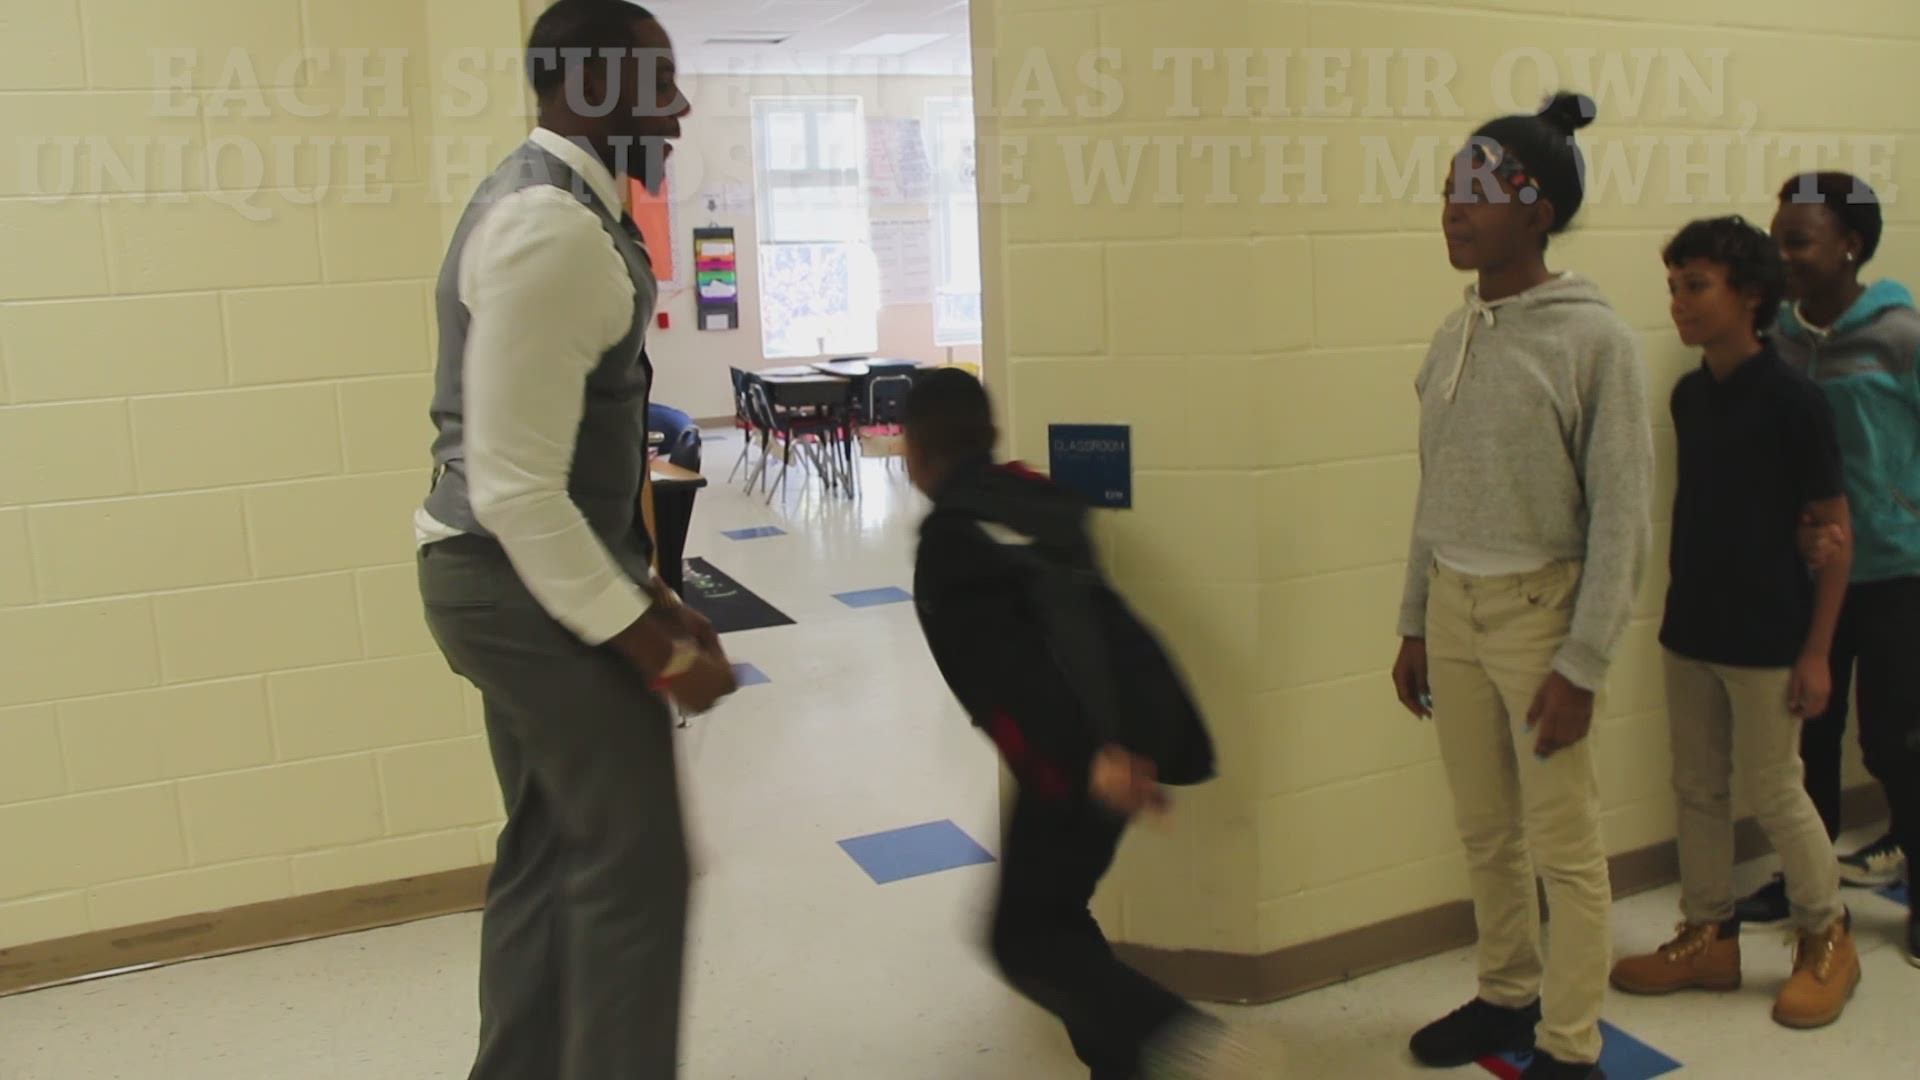 Rather than starting class off with attendance, Charlotte-Mecklenburg 5th grade teacher Barry White Jr. has a unique way to connect with each of his students before entering the classroom.